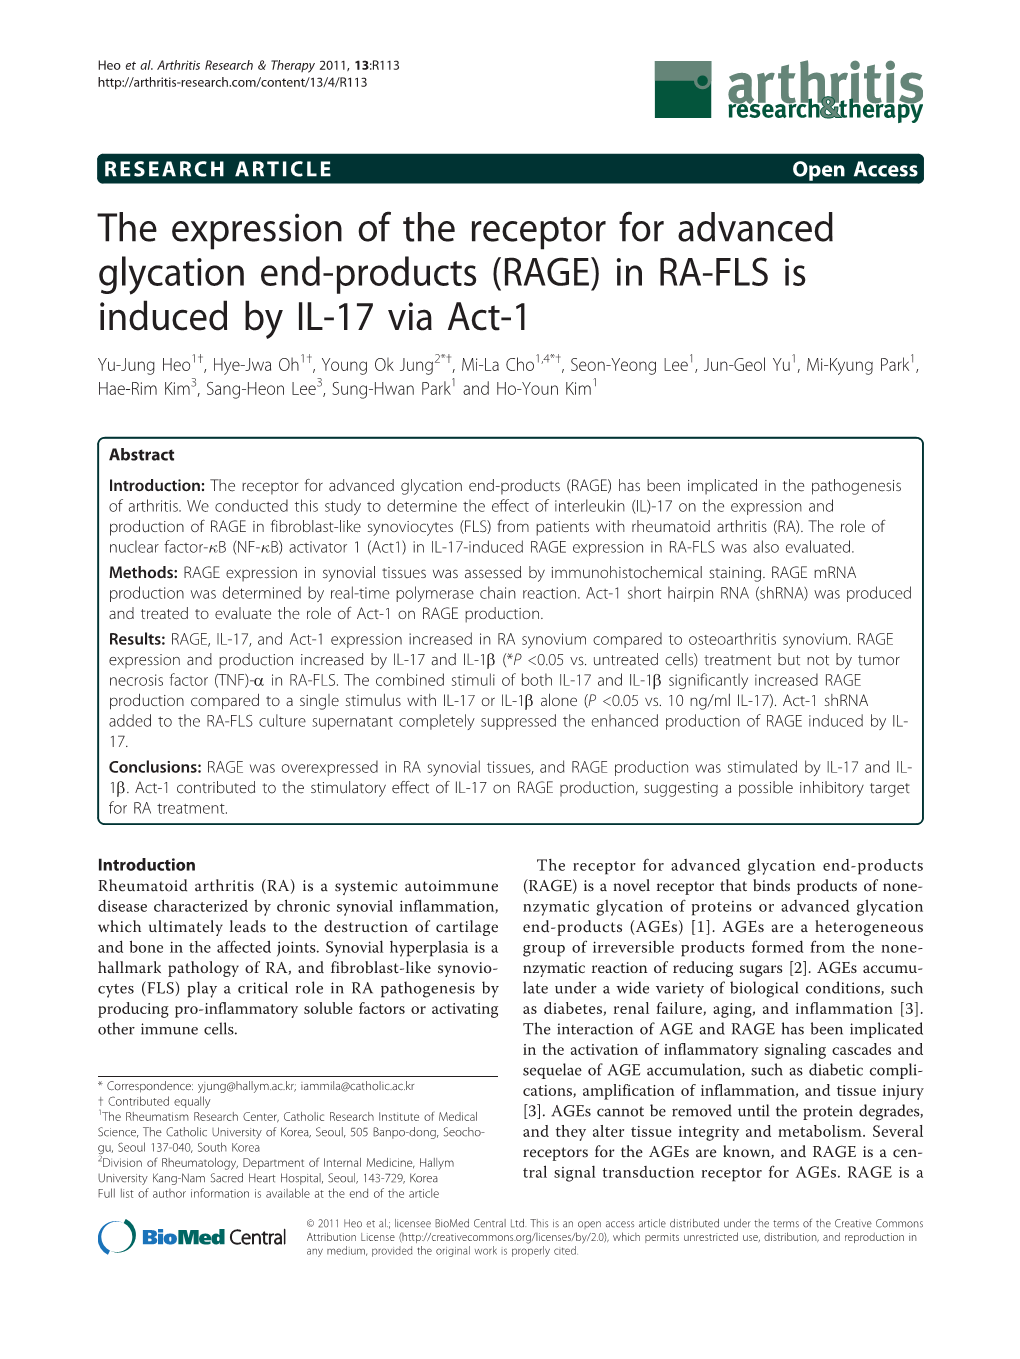 The Expression of the Receptor for Advanced Glycation End-Products